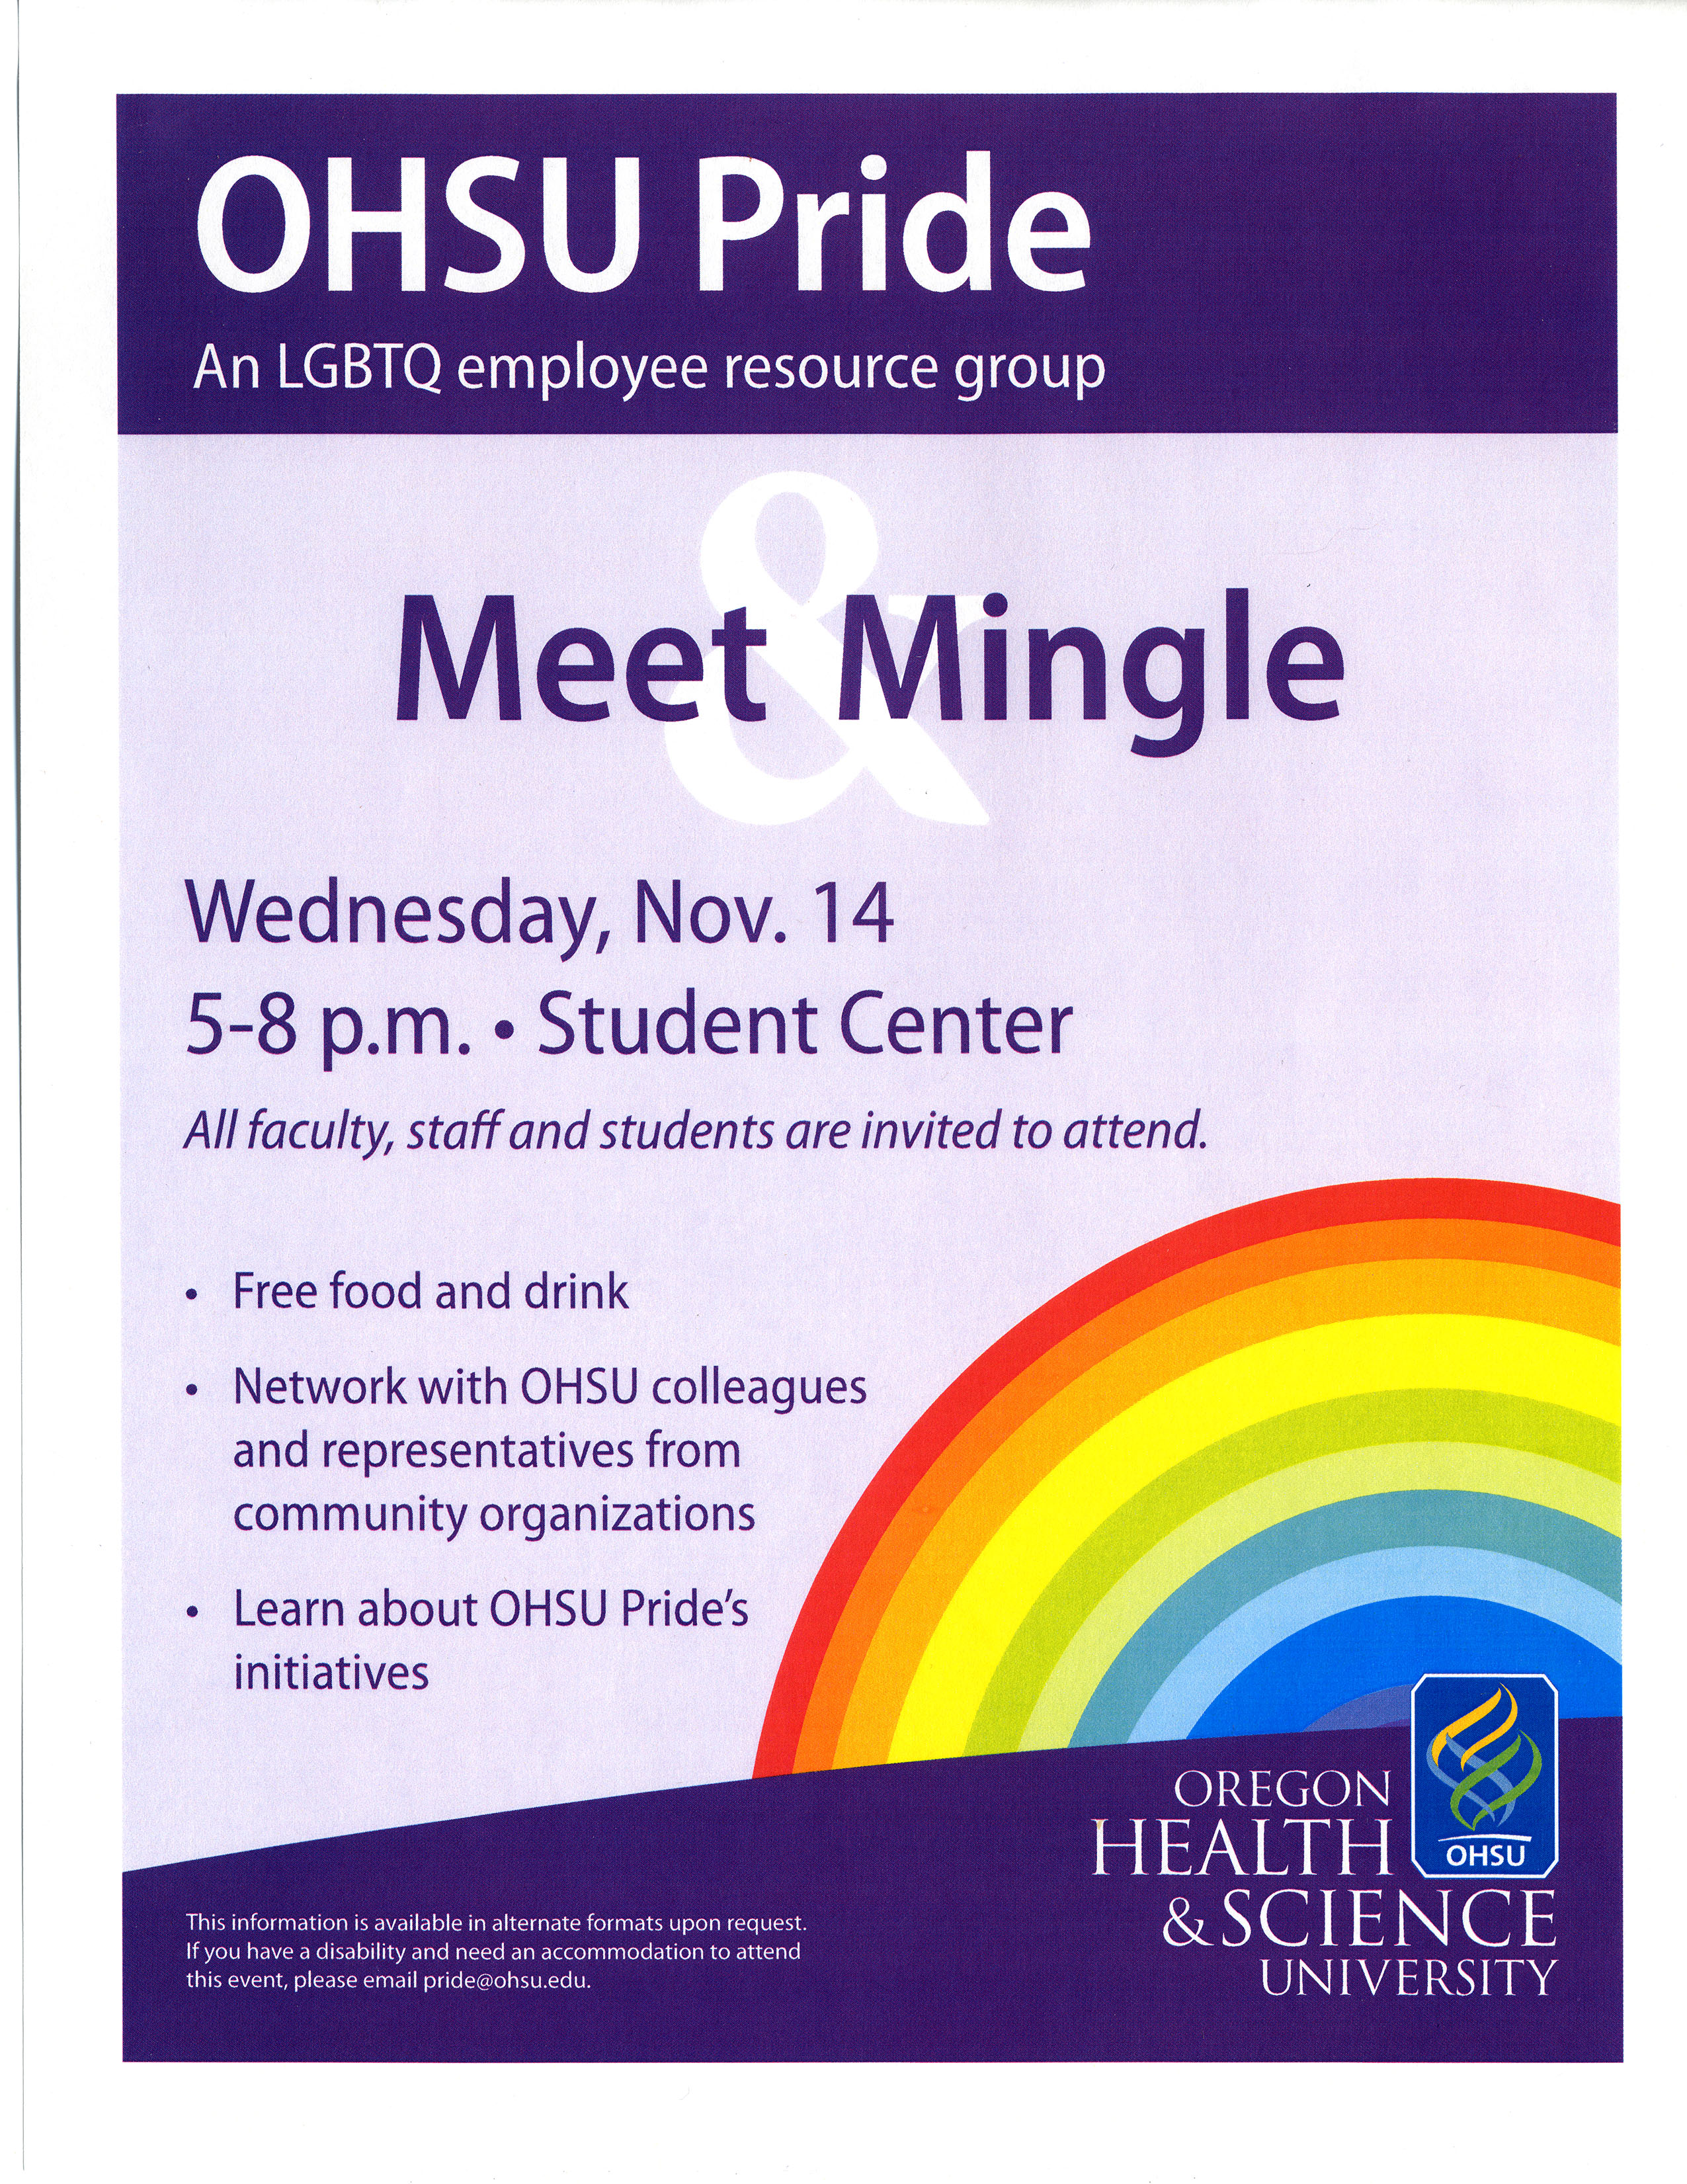 A purple flyer advertises a Meet & Mingle on Wednesday, November 14 to learn about OHSU Pride, an LGBTQ employee resource group